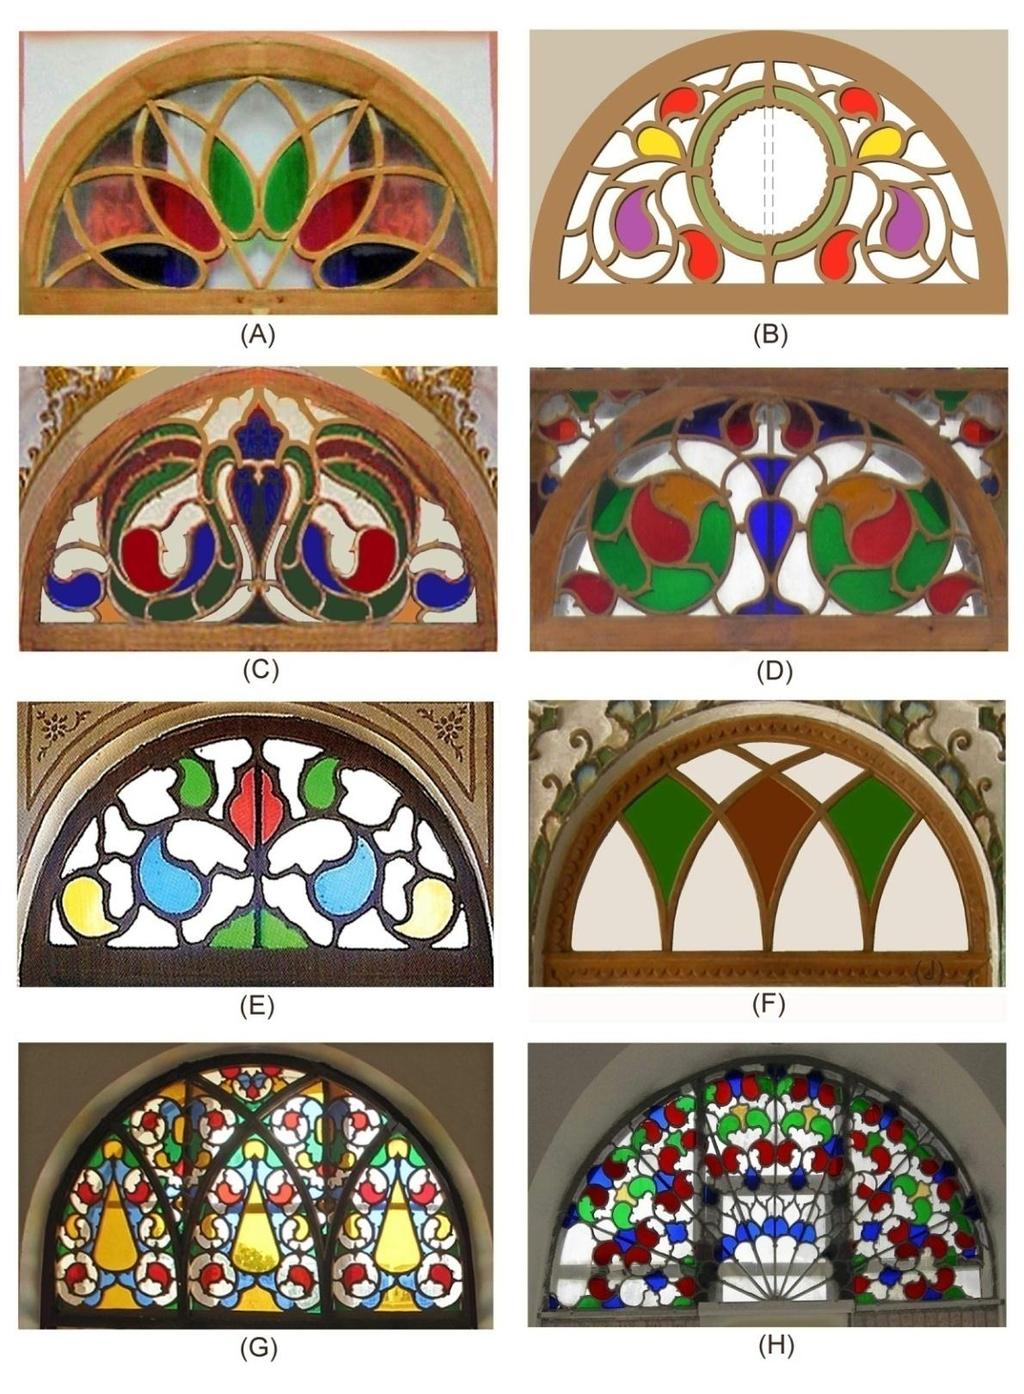 Picture ( ) Details of Persian window or Orosi and details of Eslimi pattern Picture ( ) Verity types of